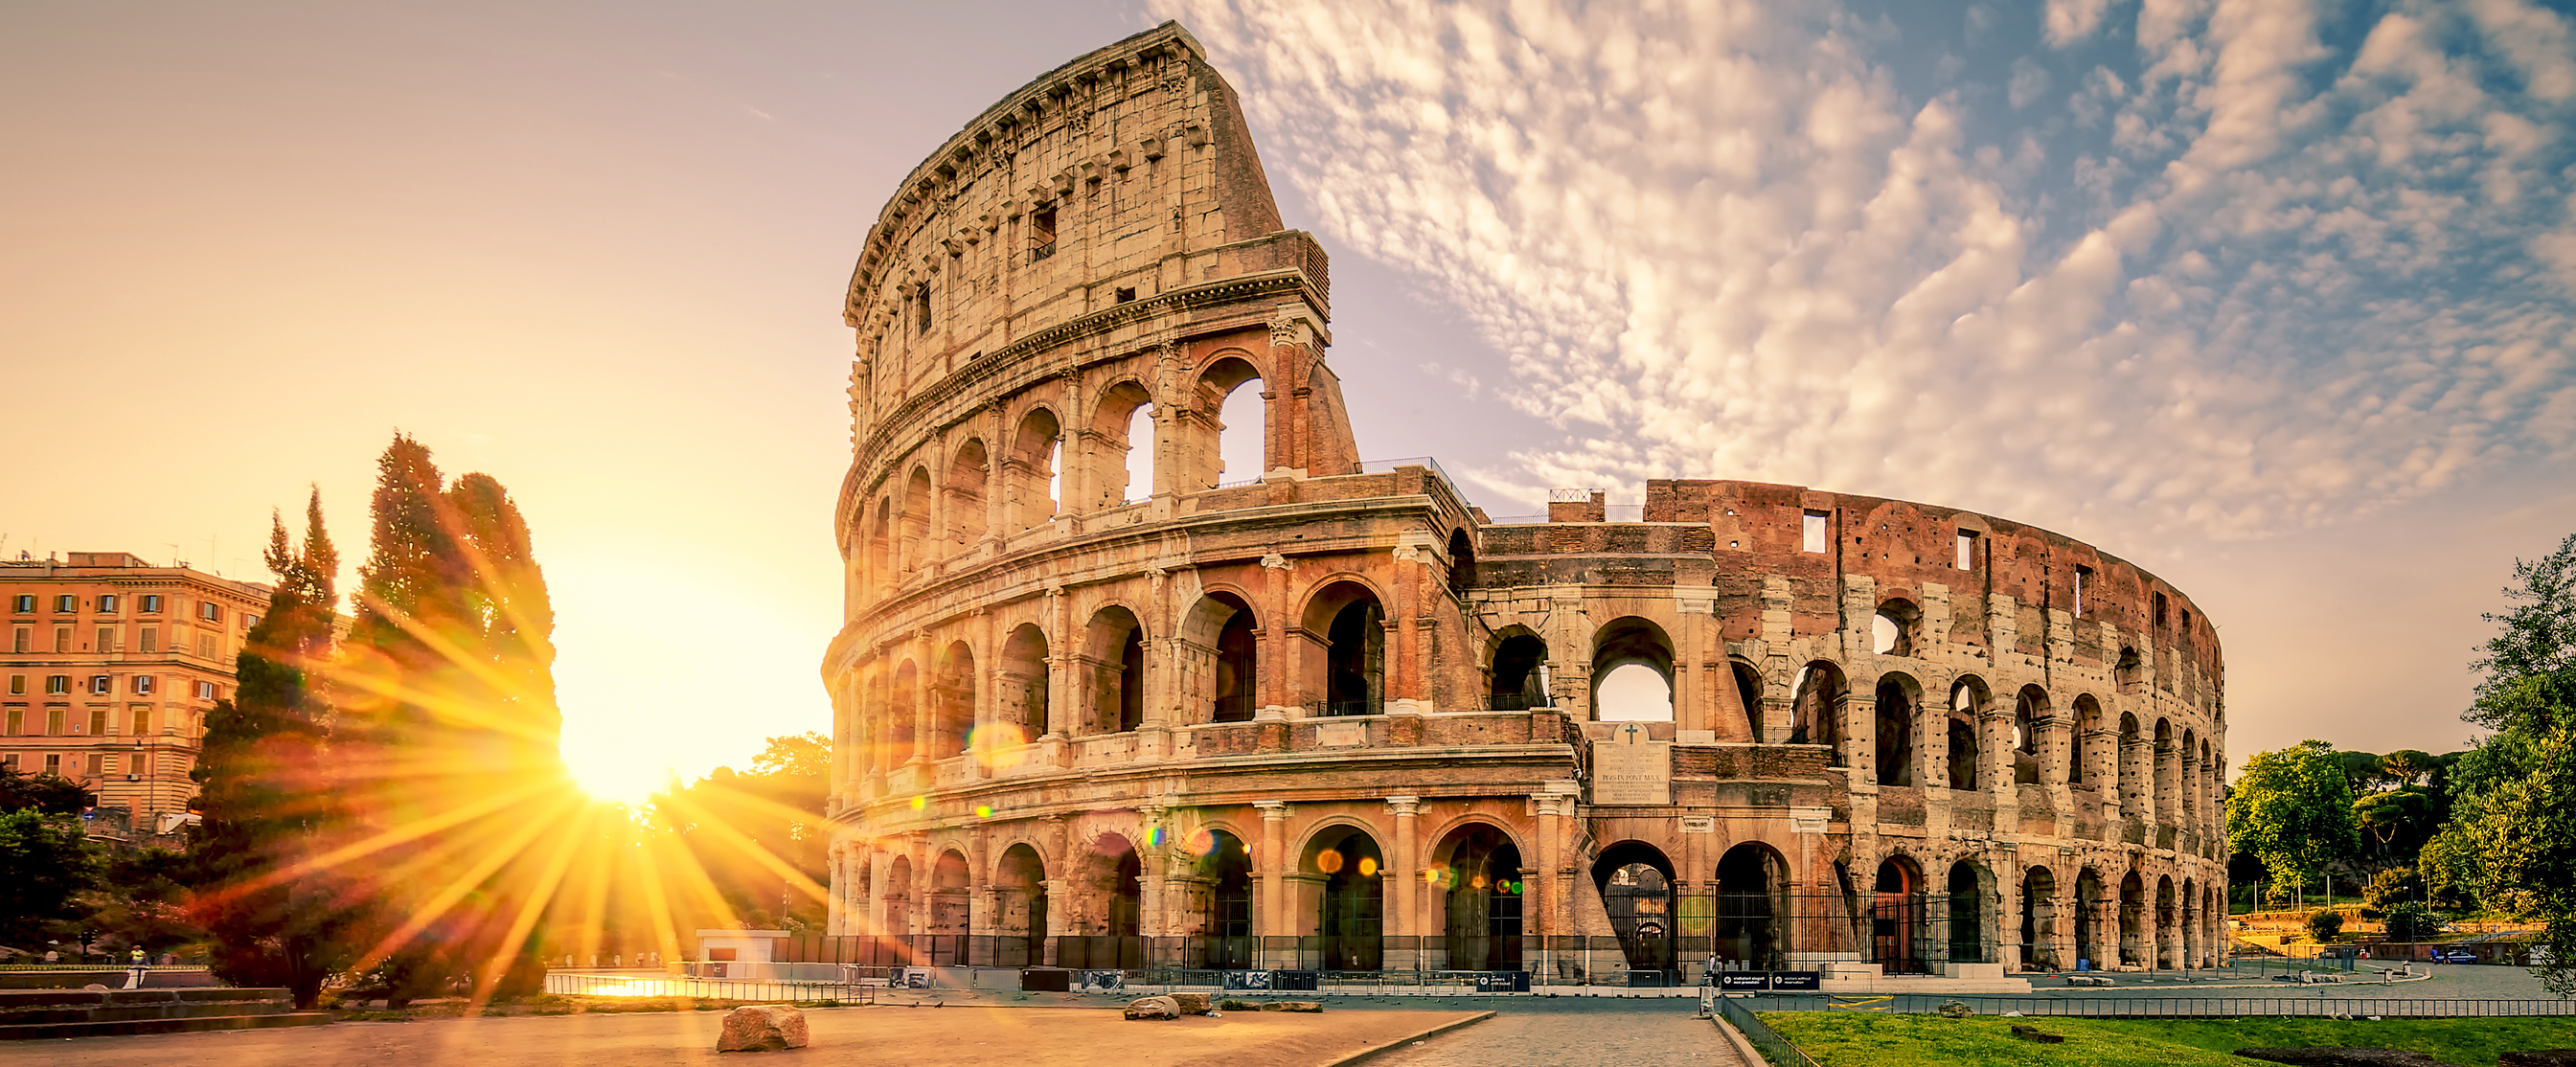 5-night Italy escape with air, breakfast & transfers from $724